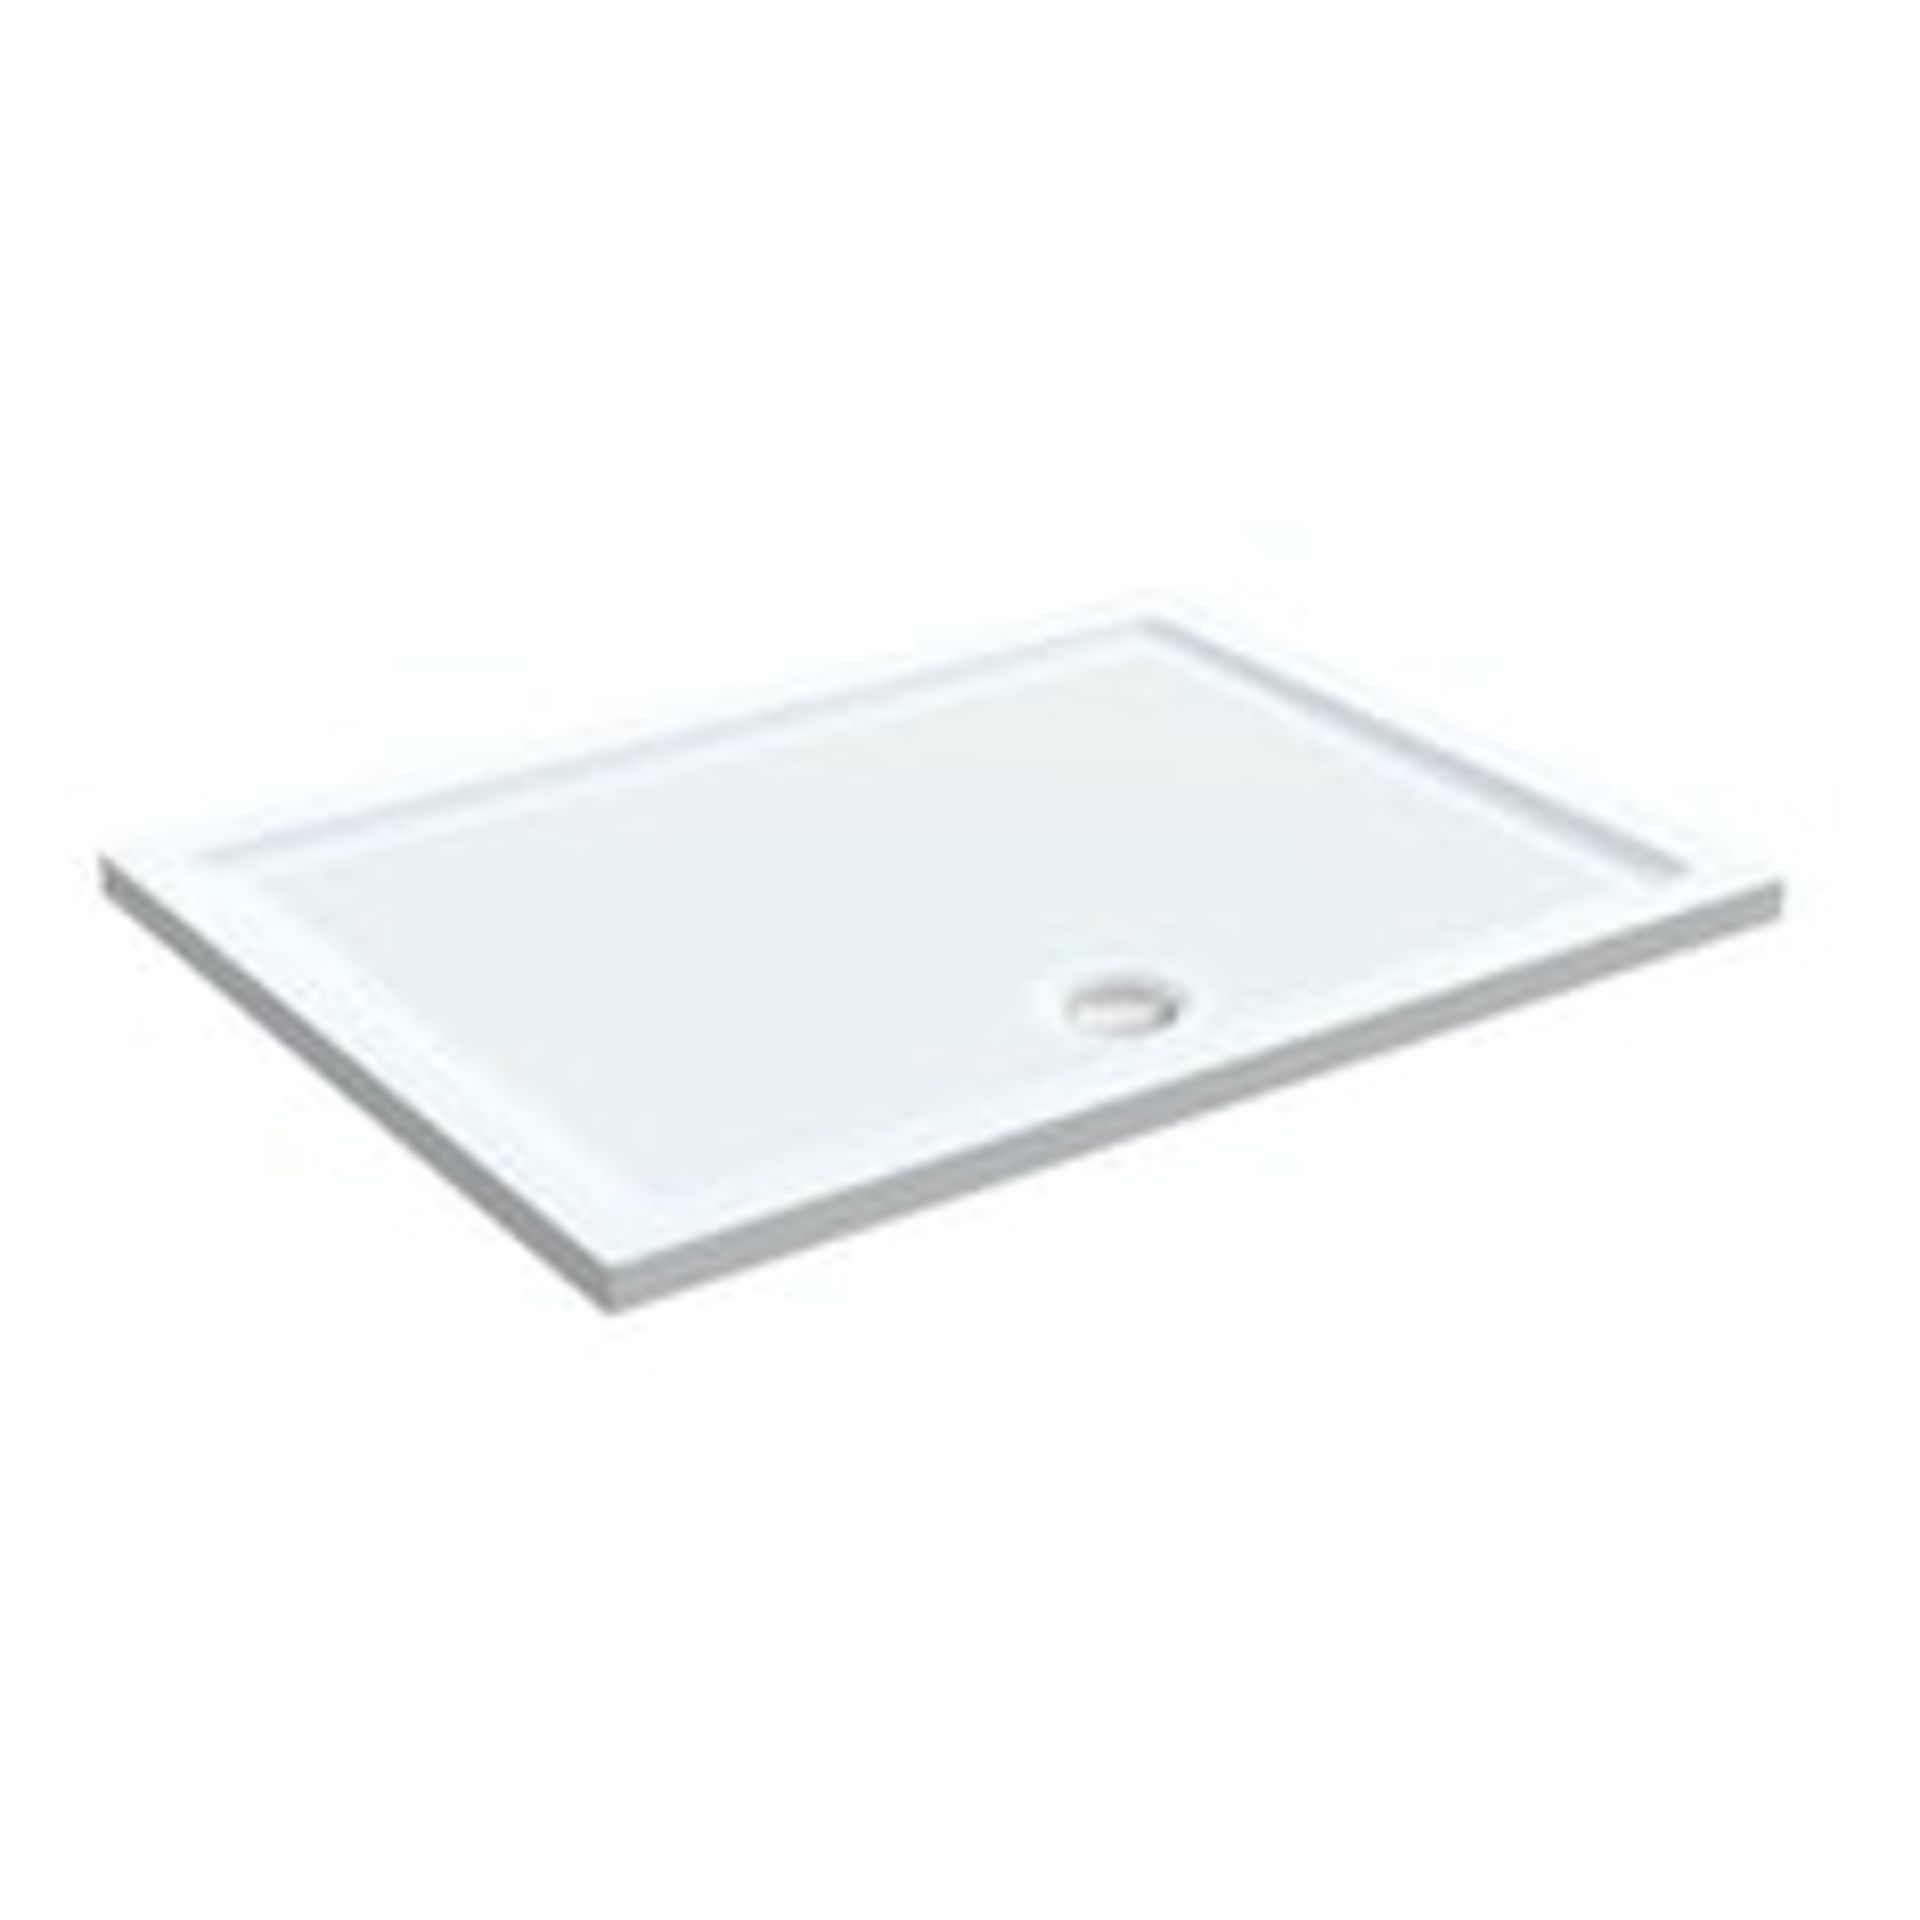 1100 x 800mm Stone resin Shower Tray